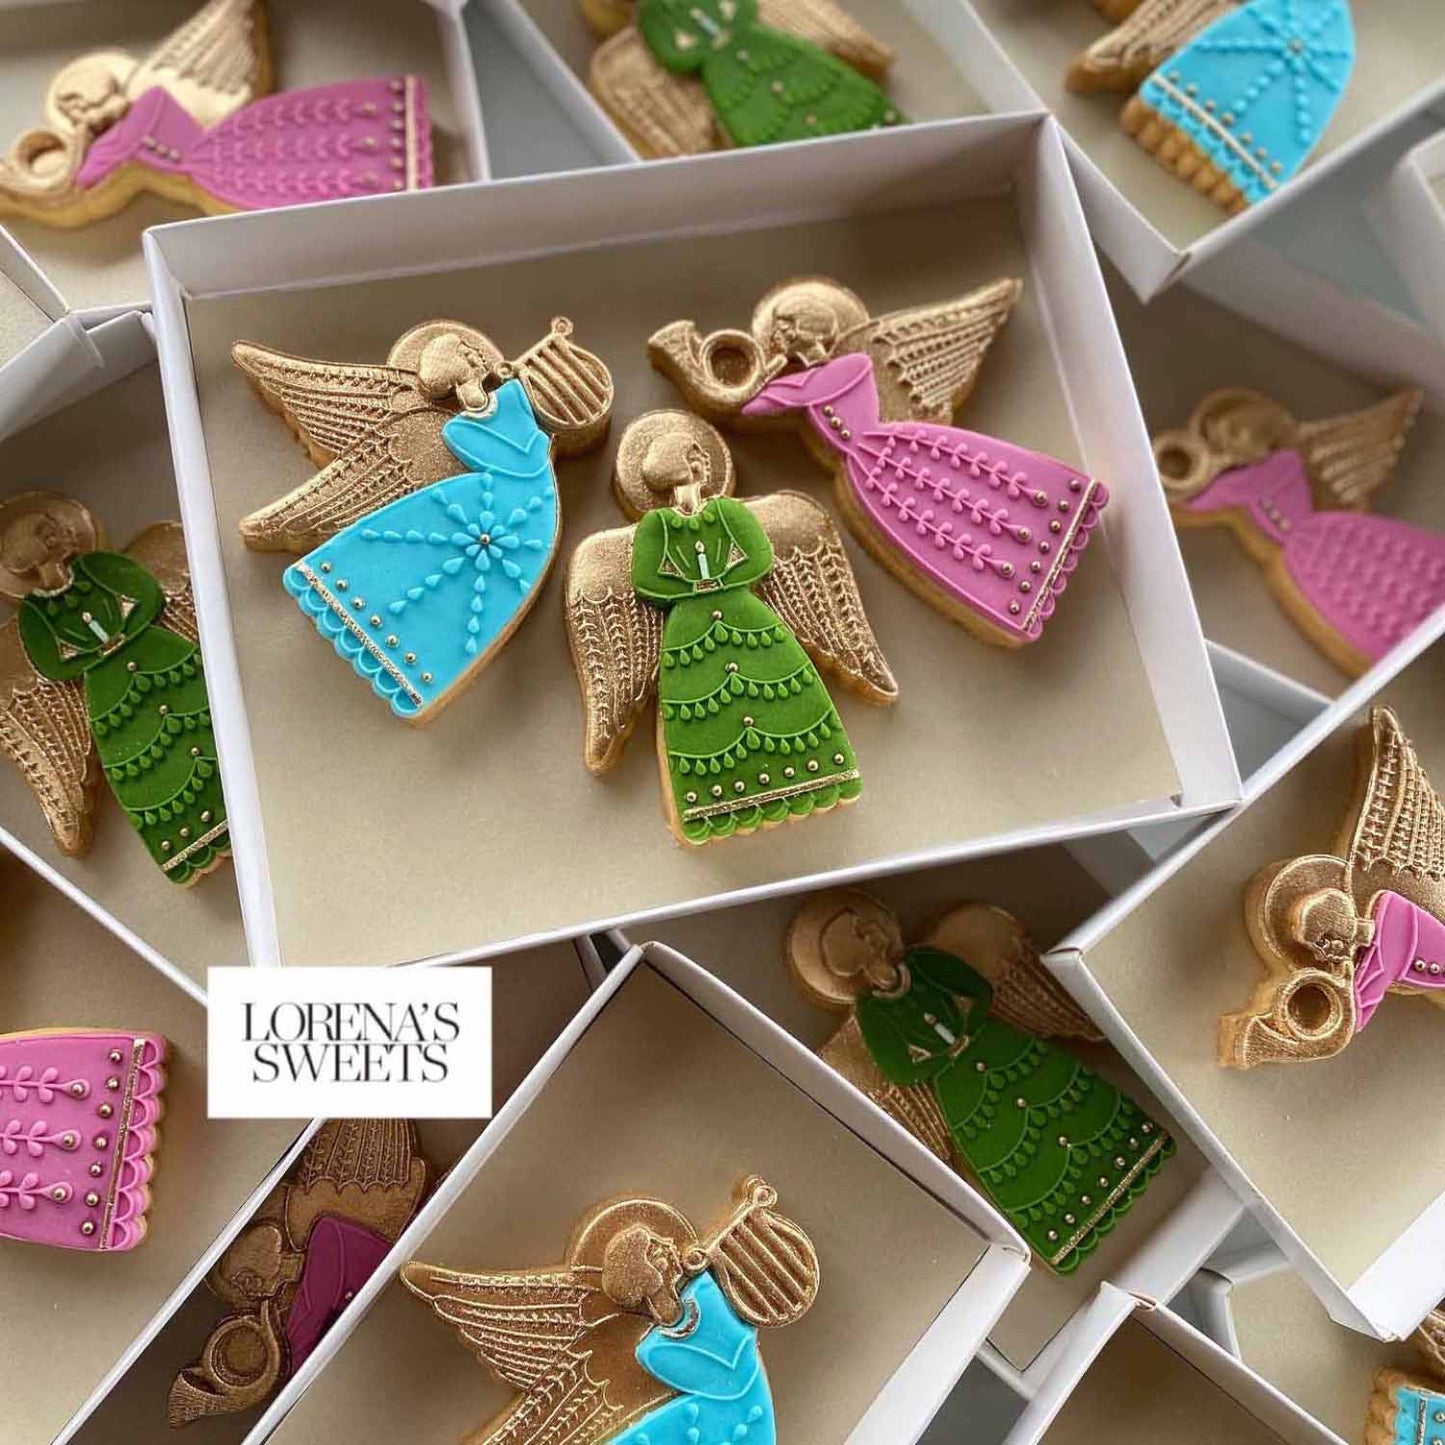 Cookie_Decoration_Kit_Angels_Choir_by_Lorena_s_Sweets